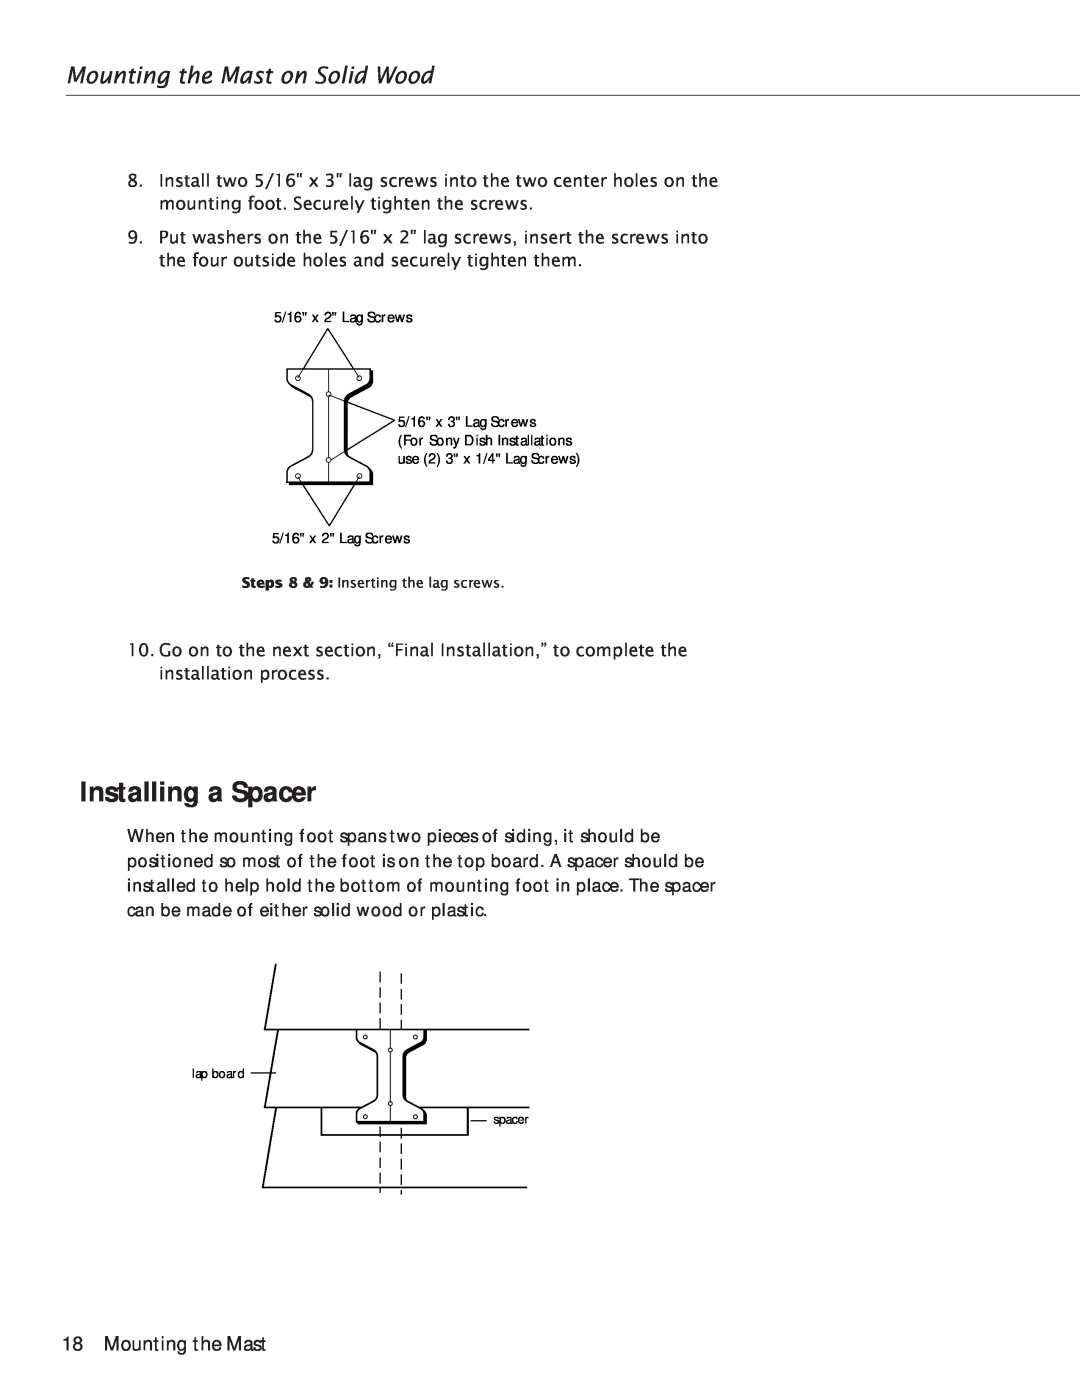 RCA Satellite TV Antenna manual Installing a Spacer, Mounting the Mast on Solid Wood 